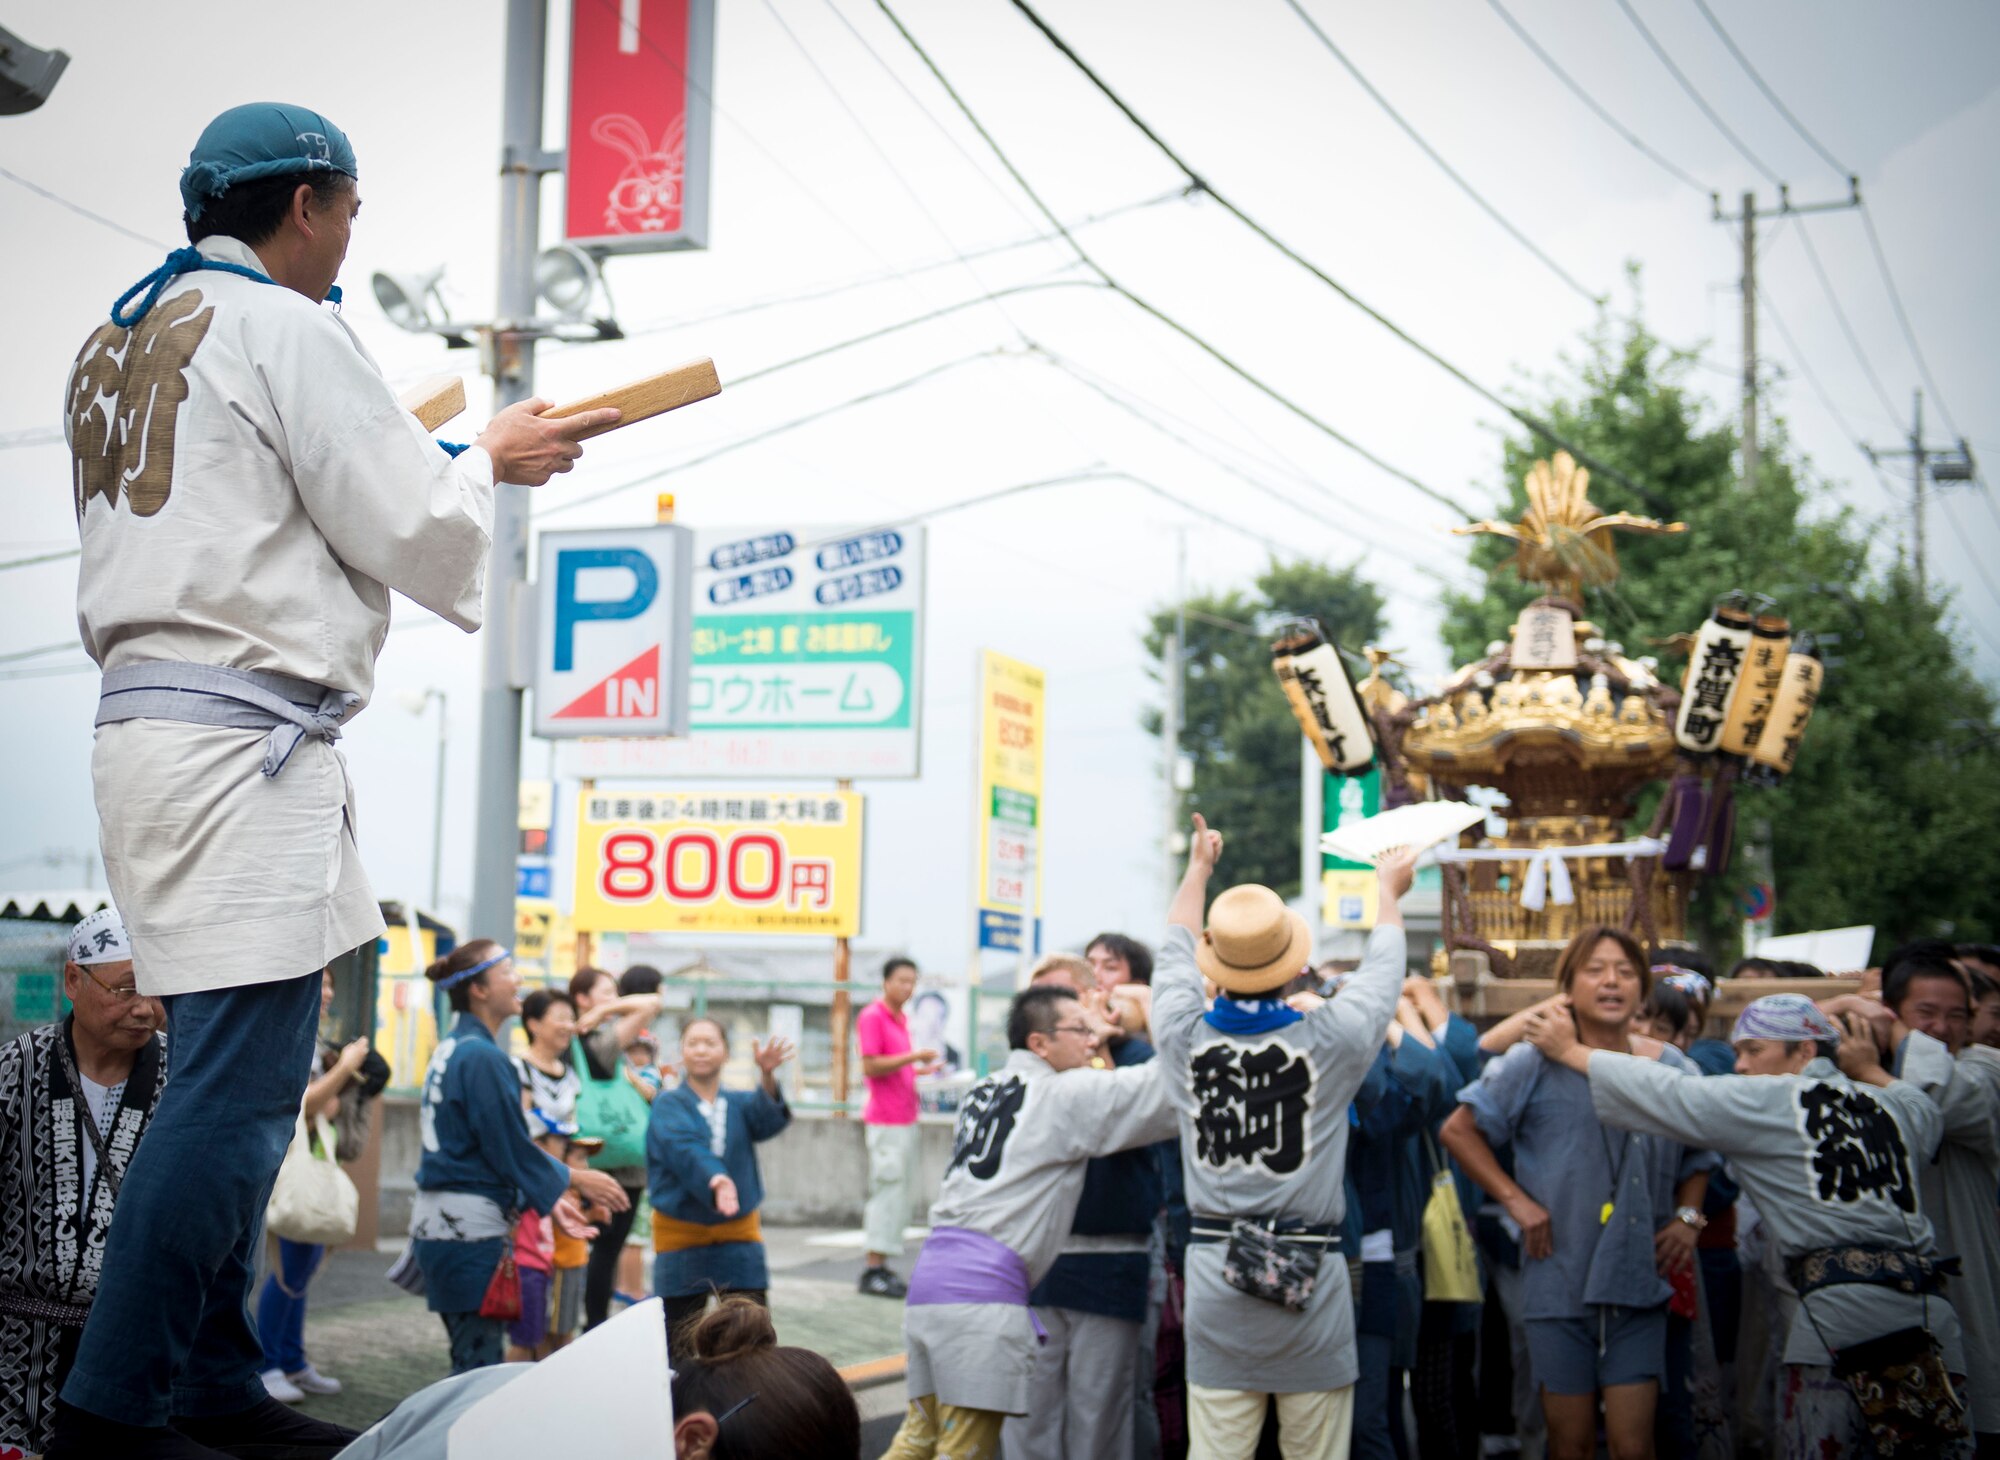 Local residents prepare to set down their mikoshi shrine during the Fussa Tanabata Festival in Fussa City, Japan, Aug. 8, 2013. Each year, members of Yokota join the festival to participate in the Japanese tradition and foster relationships with the local community. (U.S. Air Force photo by Airman 1st Class Meagan Schutter/Released)